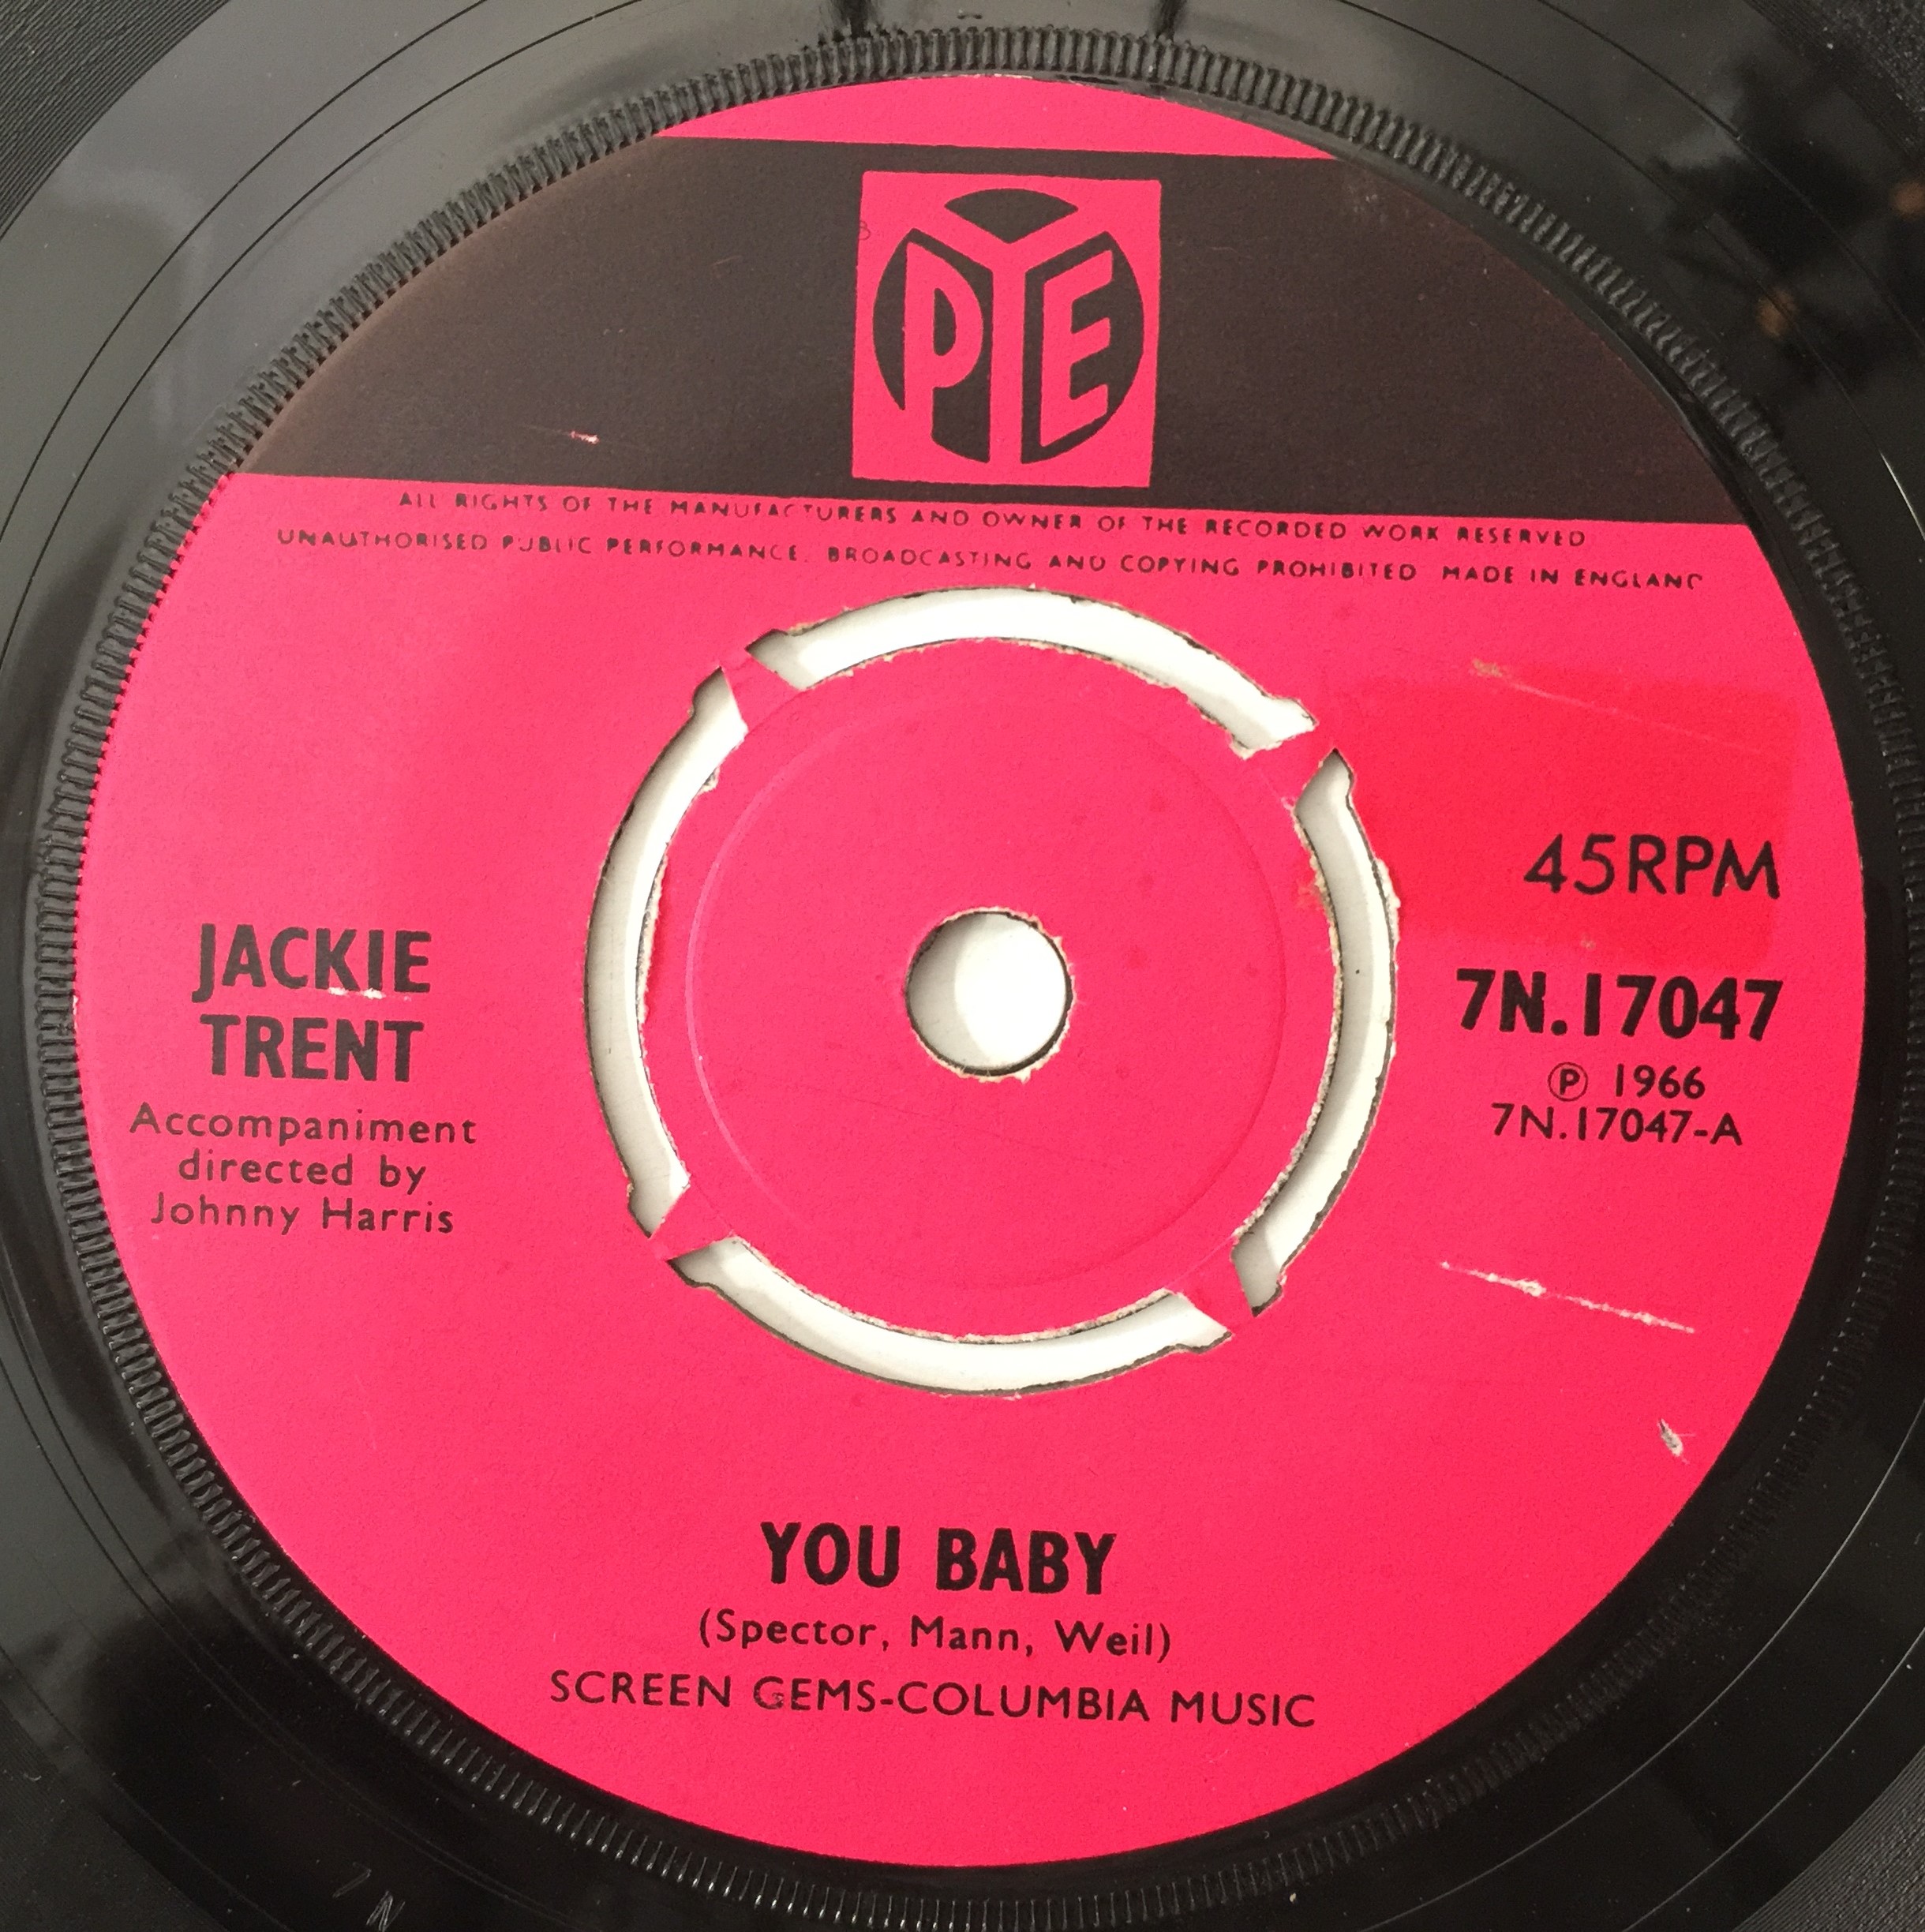 Lot 74 - JACKIE TRENT - YOU BABY 7 (PYE RECORDS -